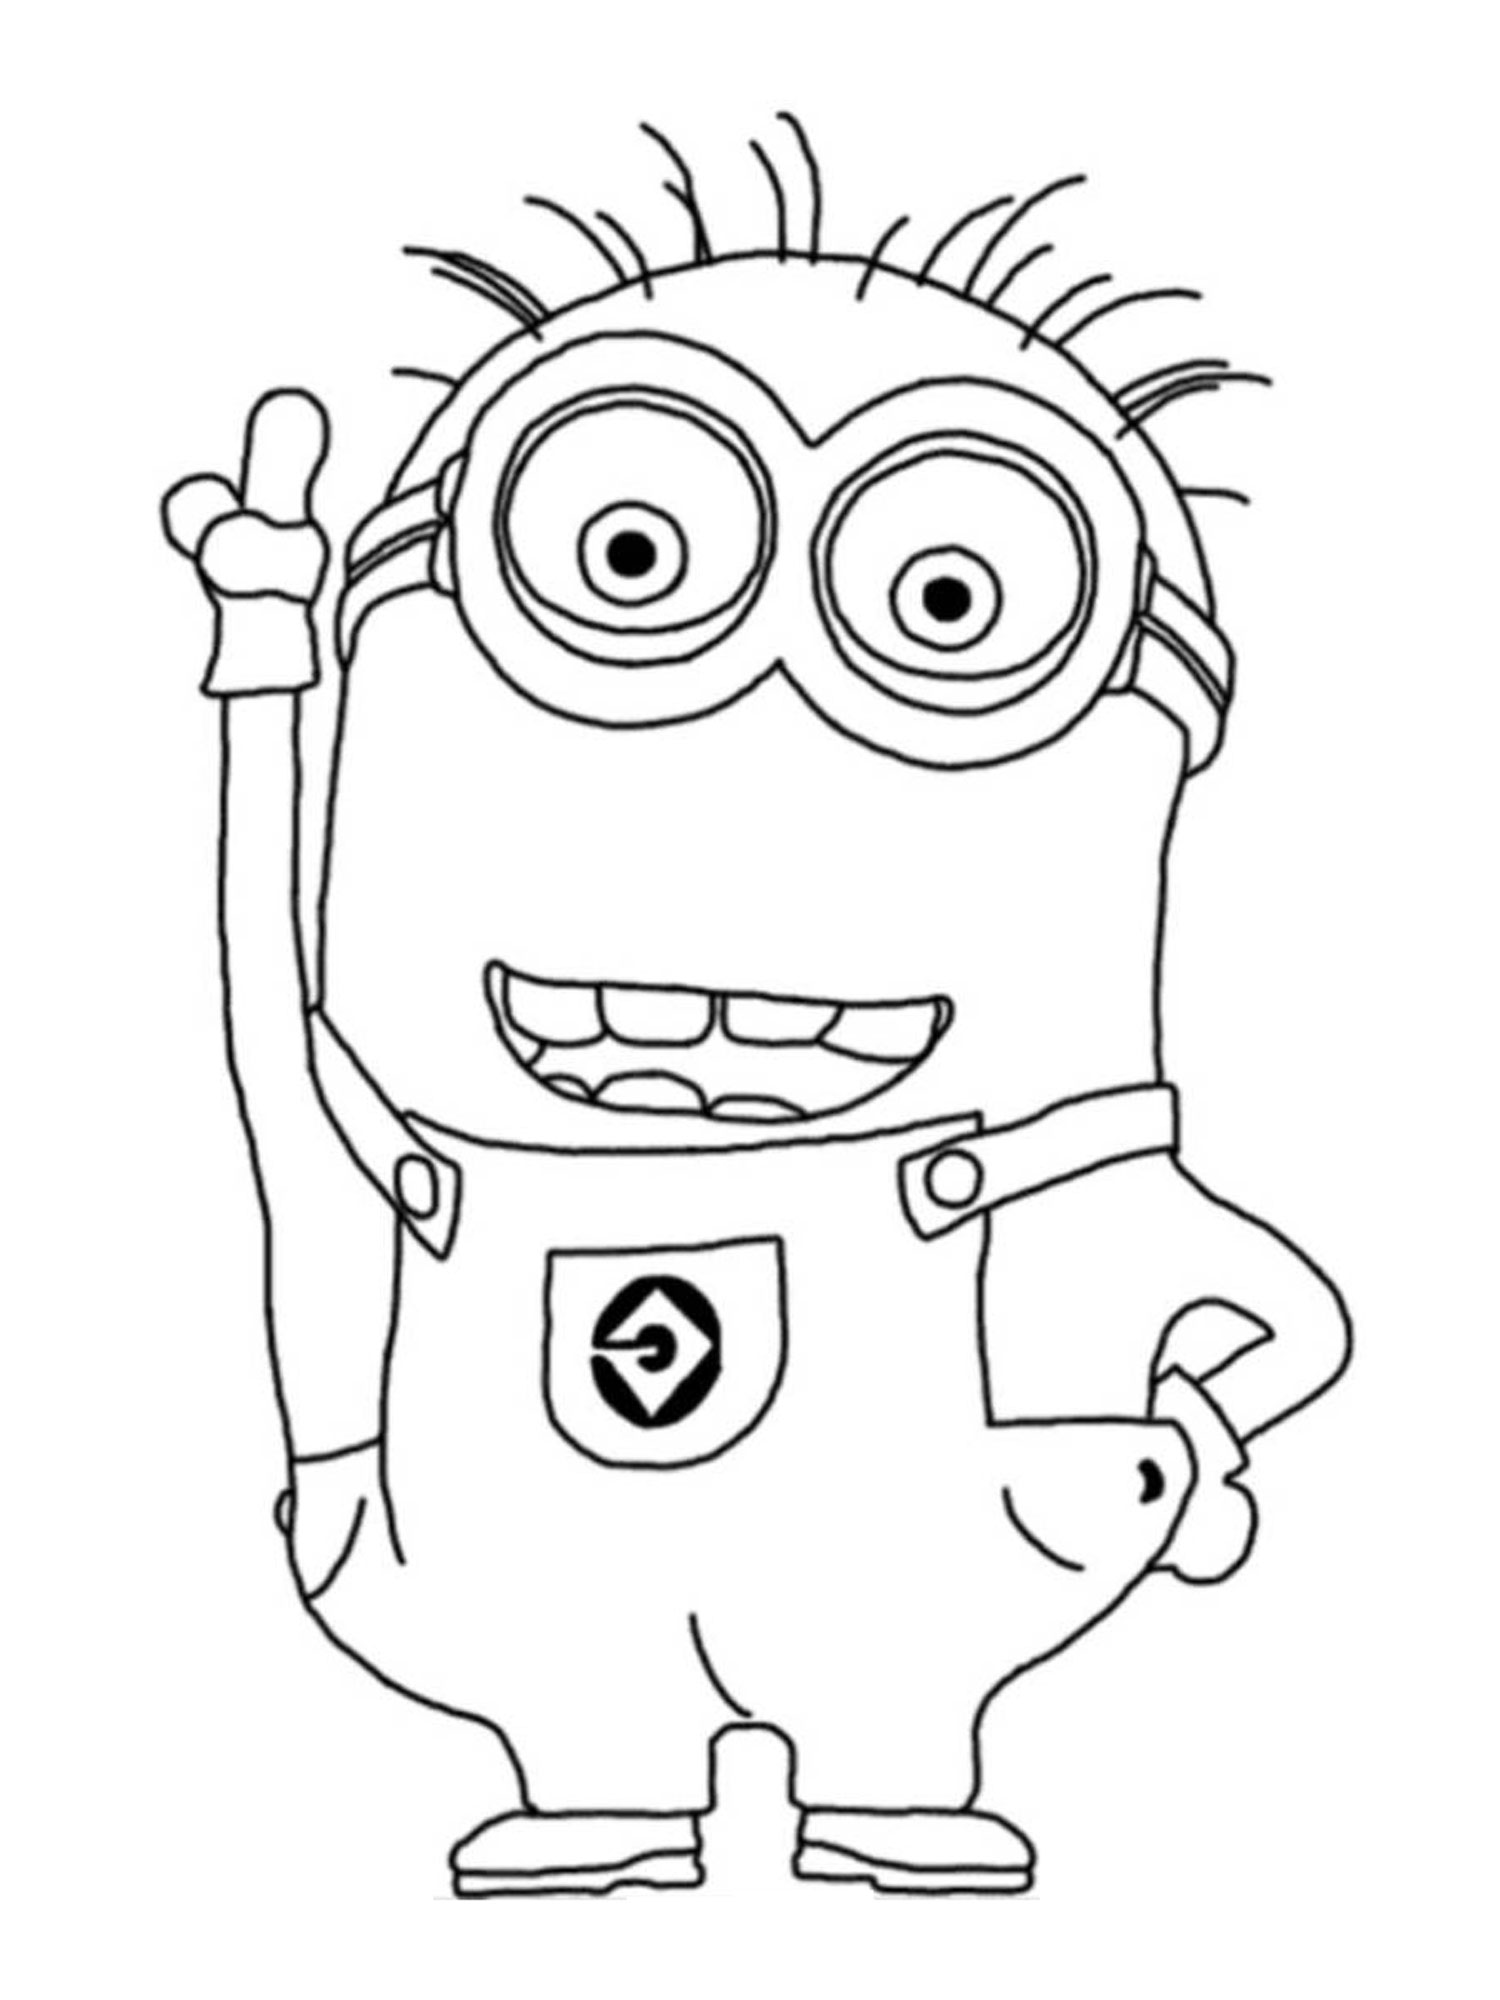 100+ Minions (Despicable Me) coloring pages for kids – ElectroDealPro